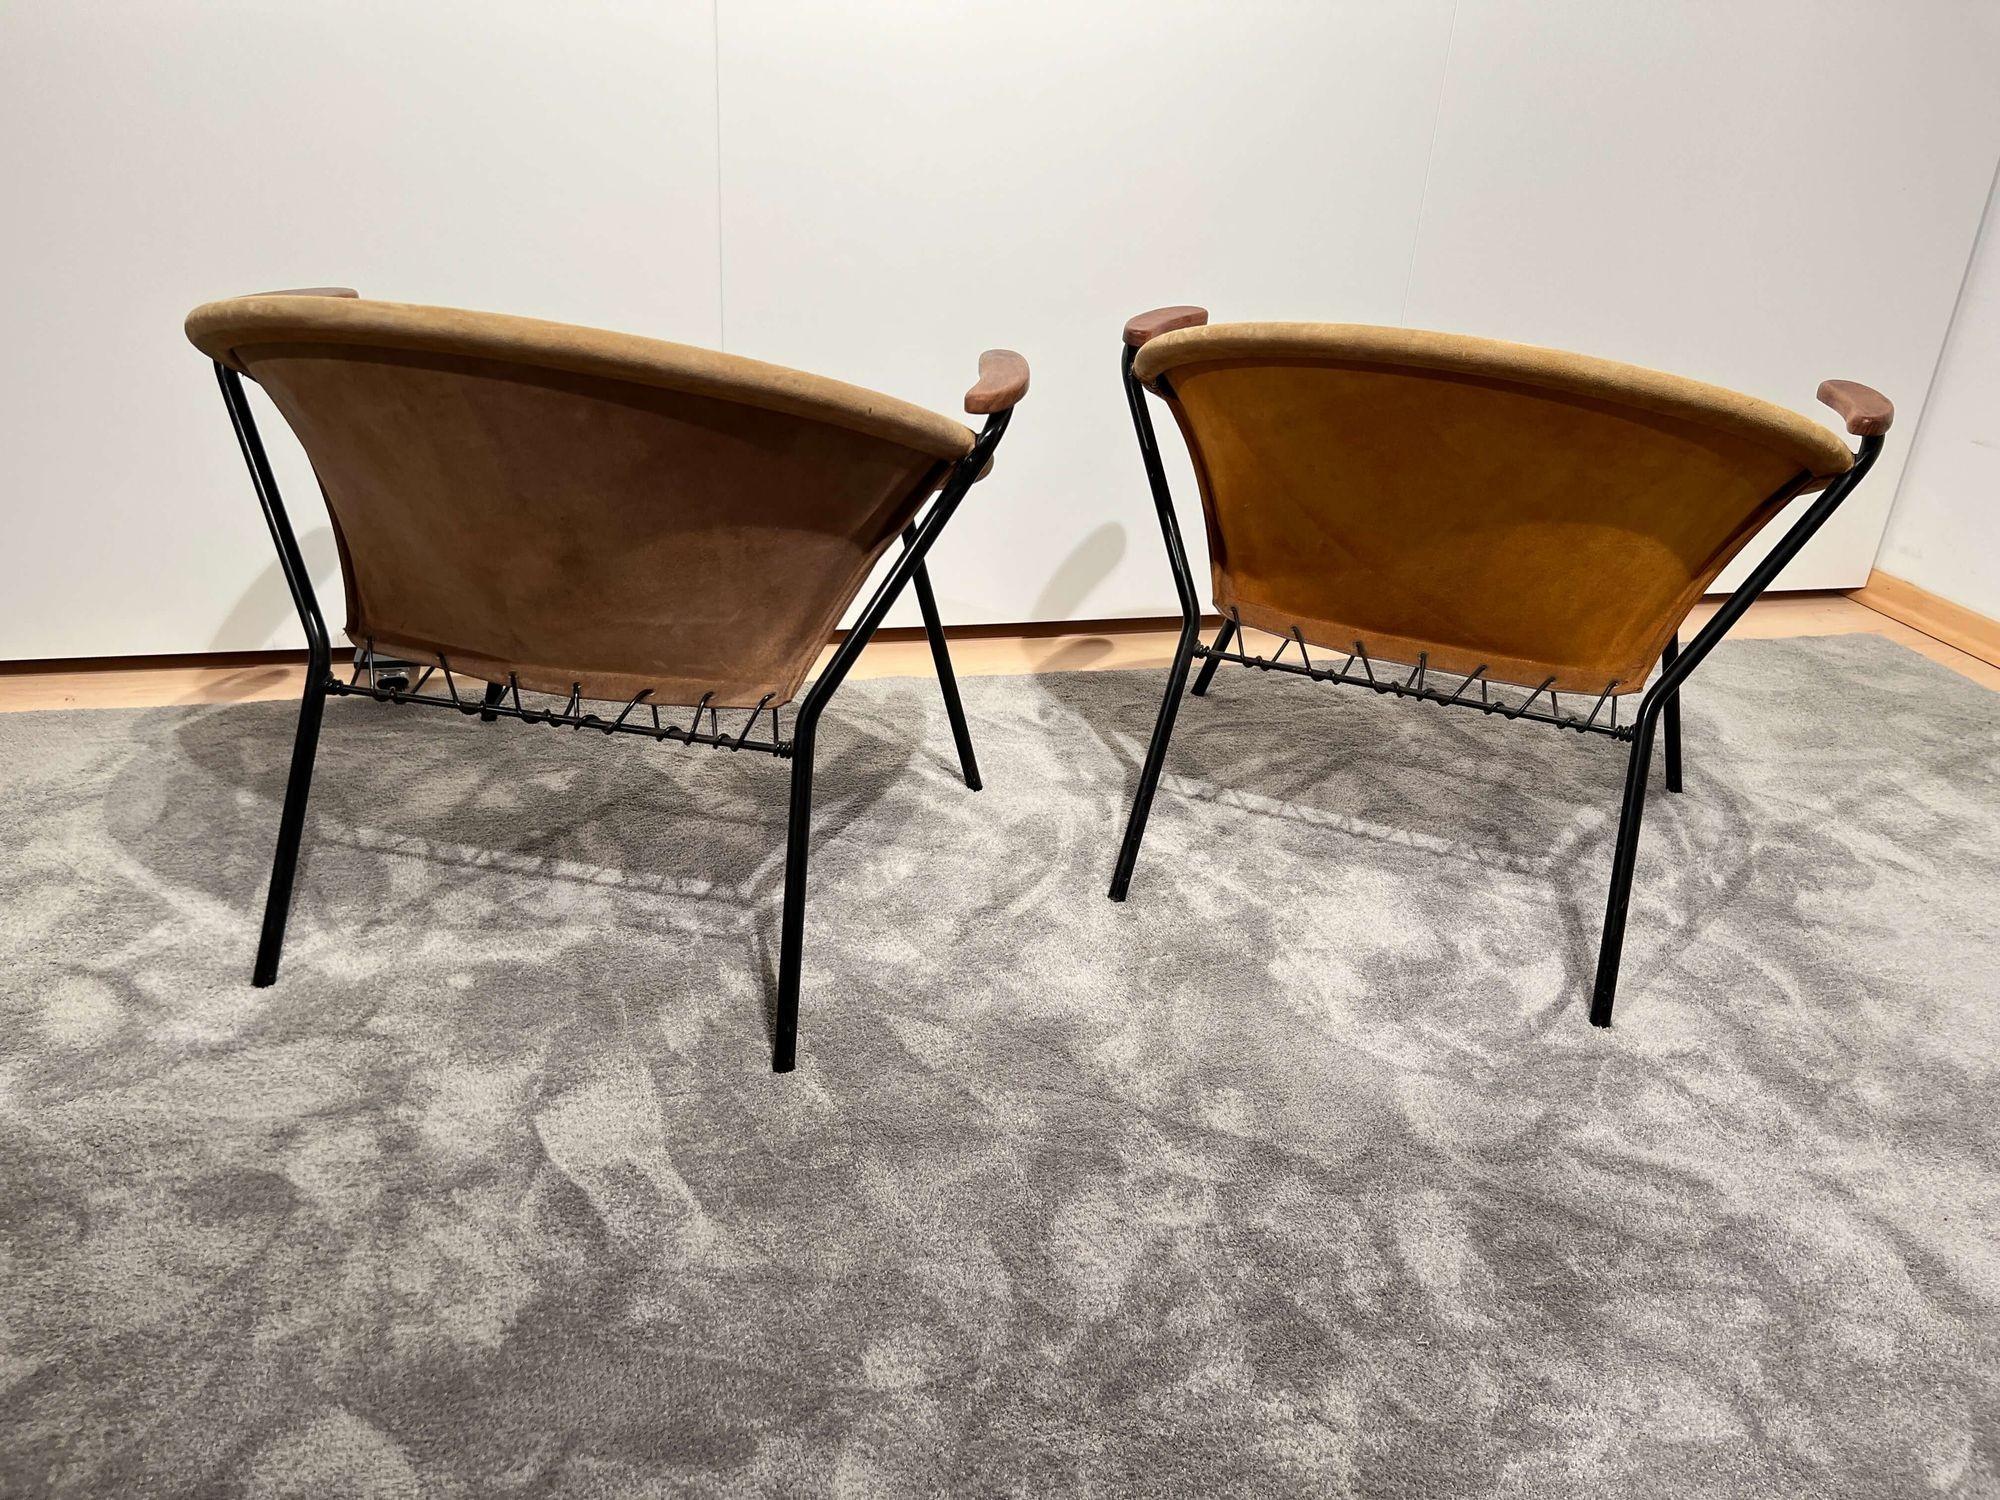 Pair of ‚Balloon’ Lounge Chairs by Hans Olsen, Yellow Suede, Denmark, circa 1960 In Good Condition For Sale In Regensburg, DE